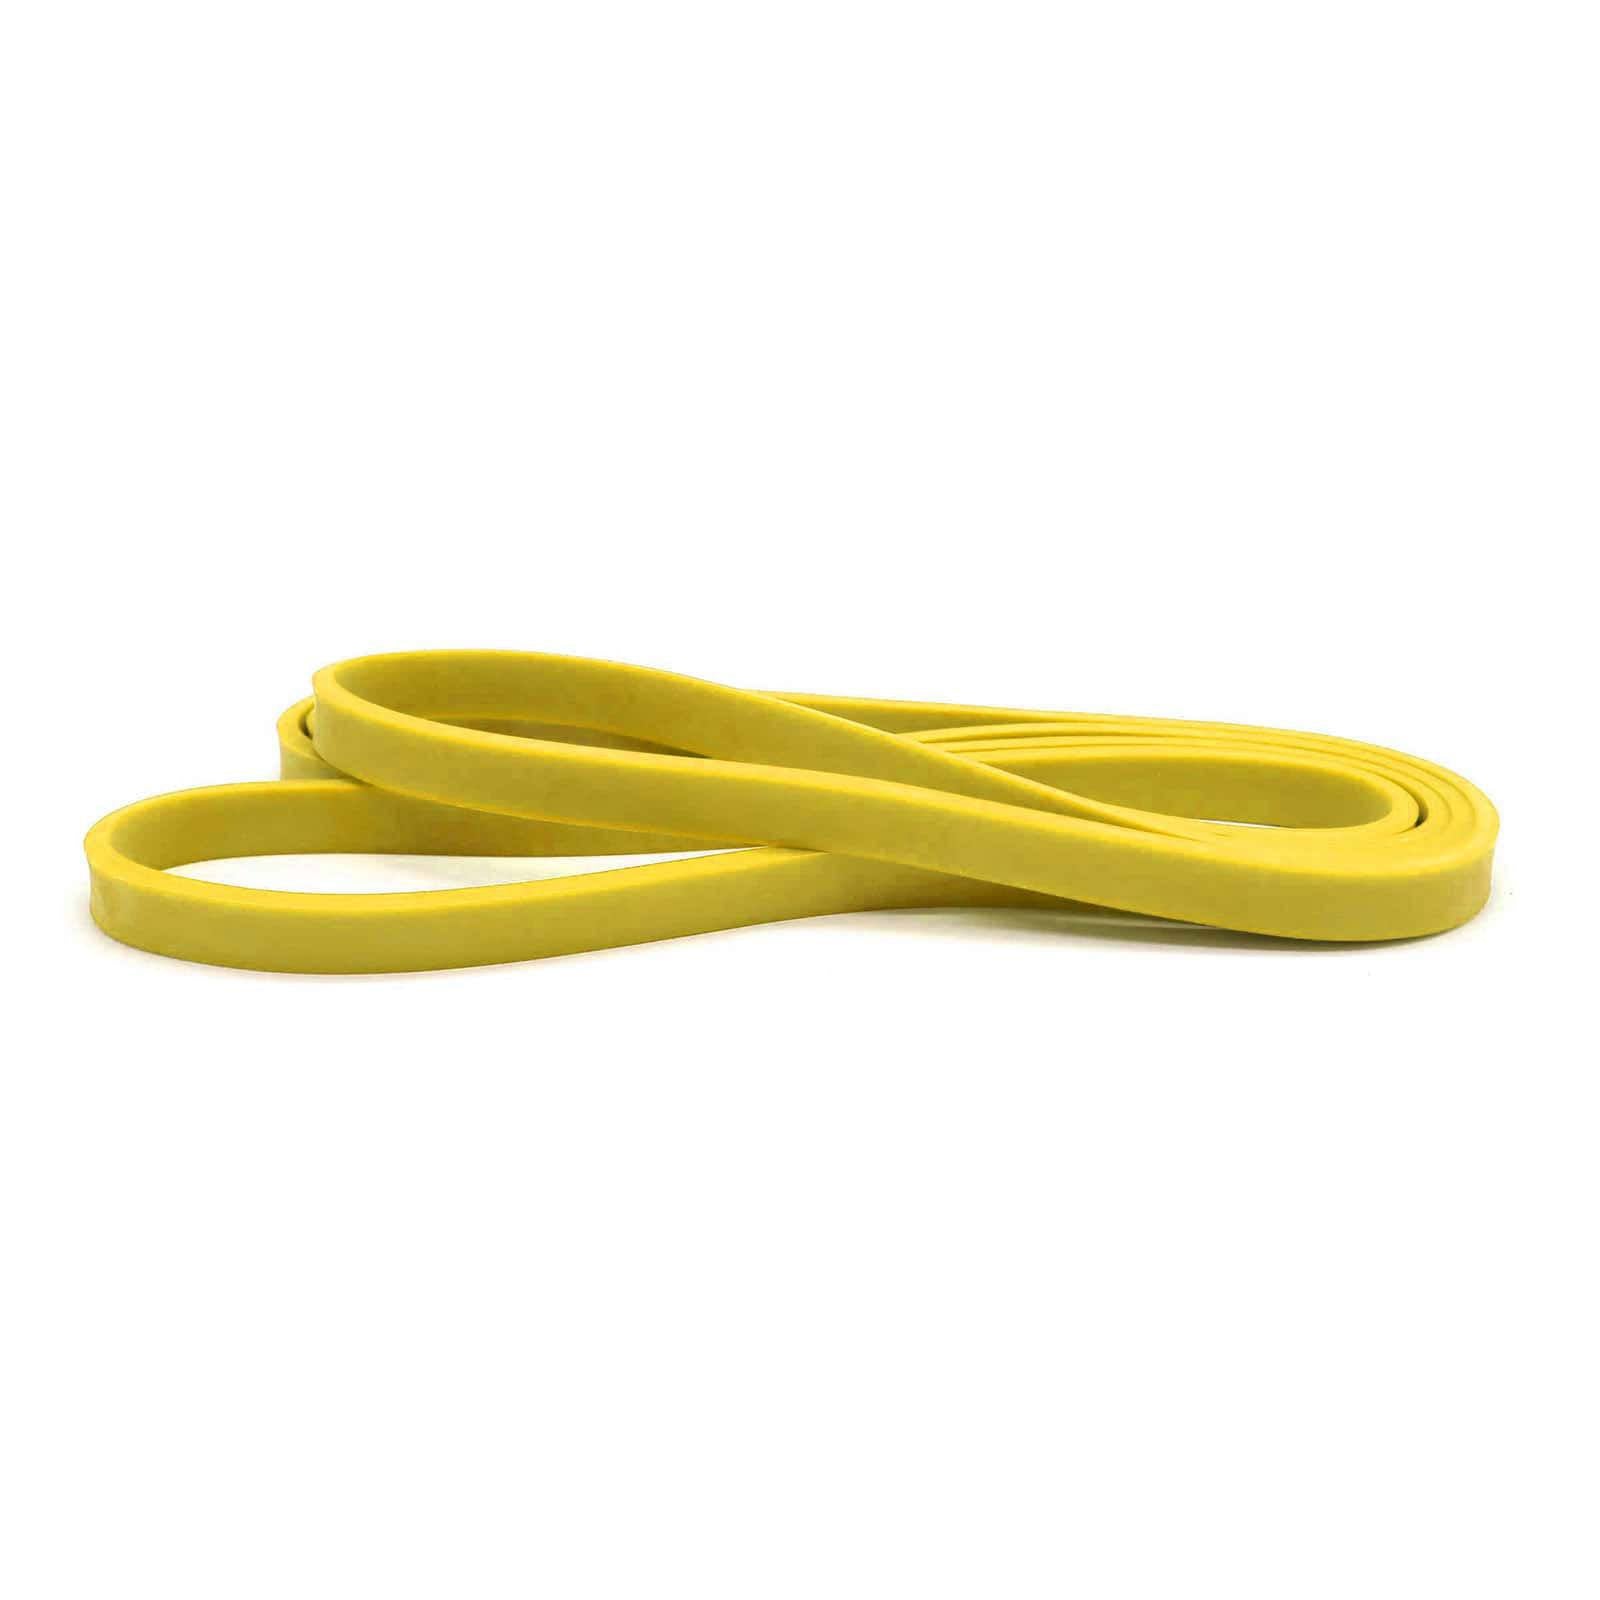 Wolverson Foundation Power / Resistance Bands